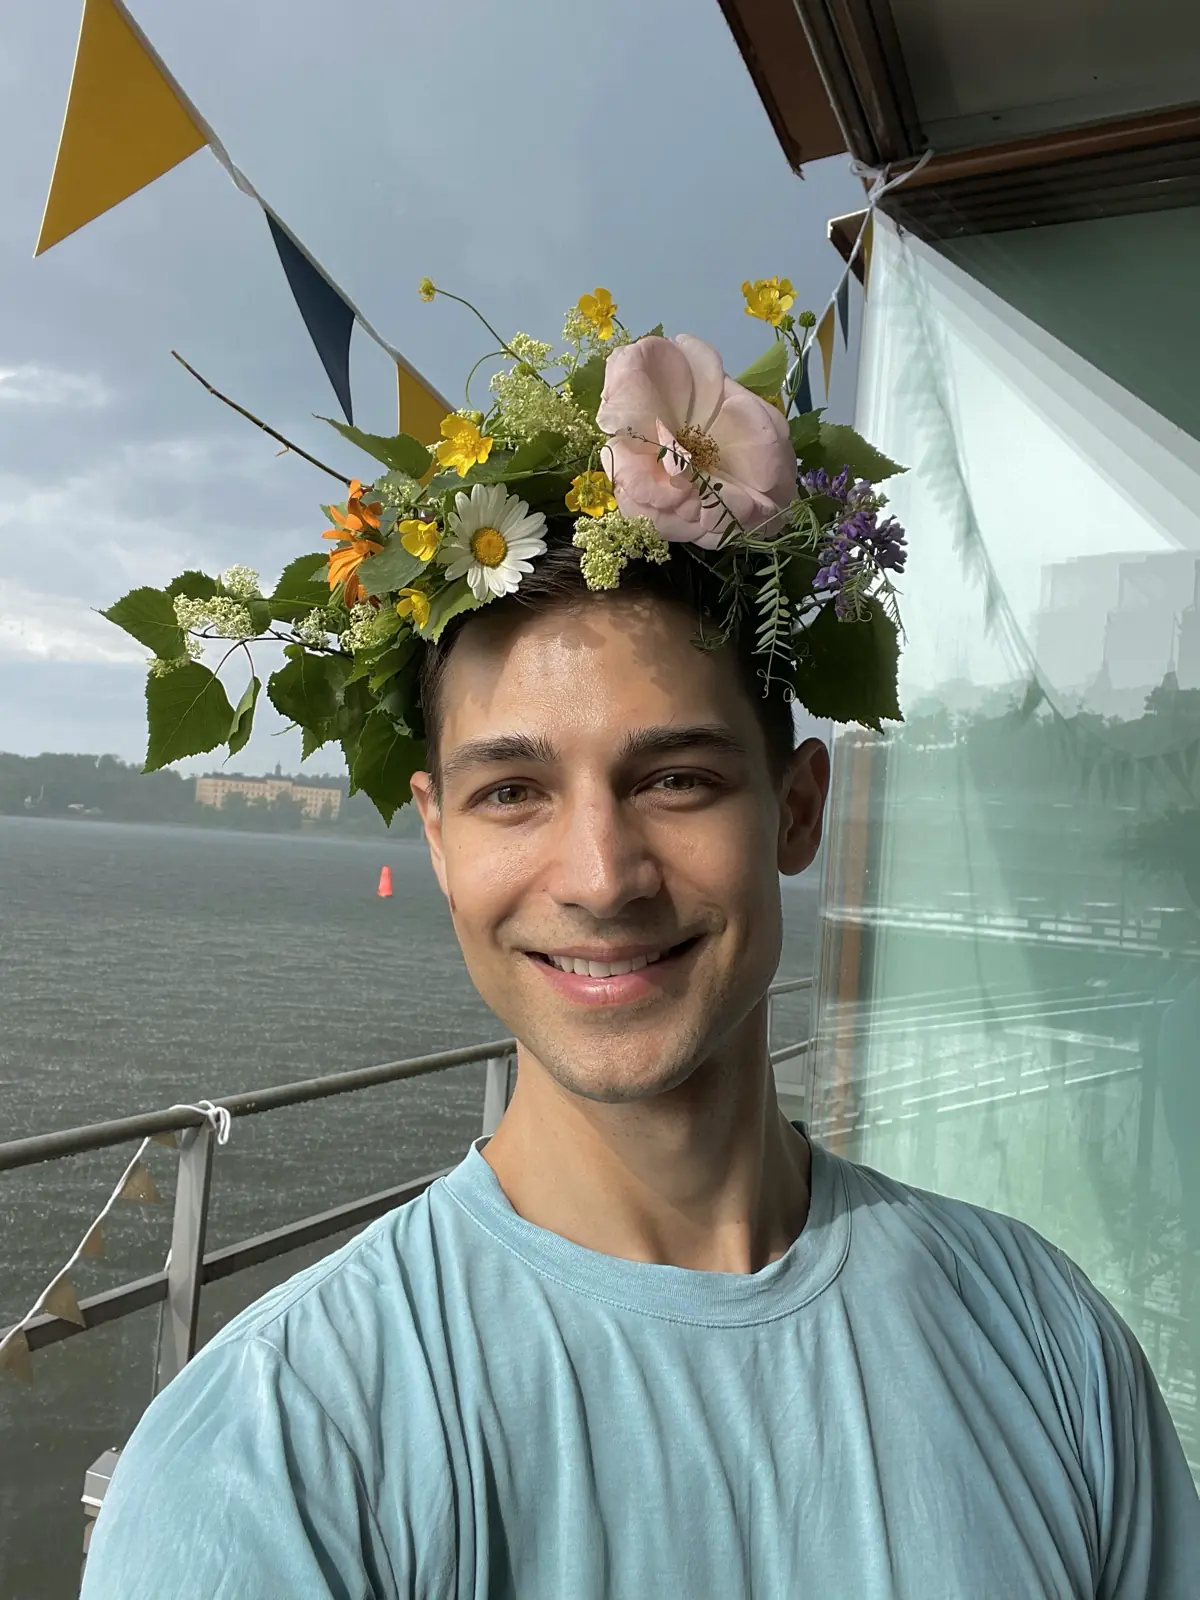 Jeremiah wearing a traditional Midsommar flower crown